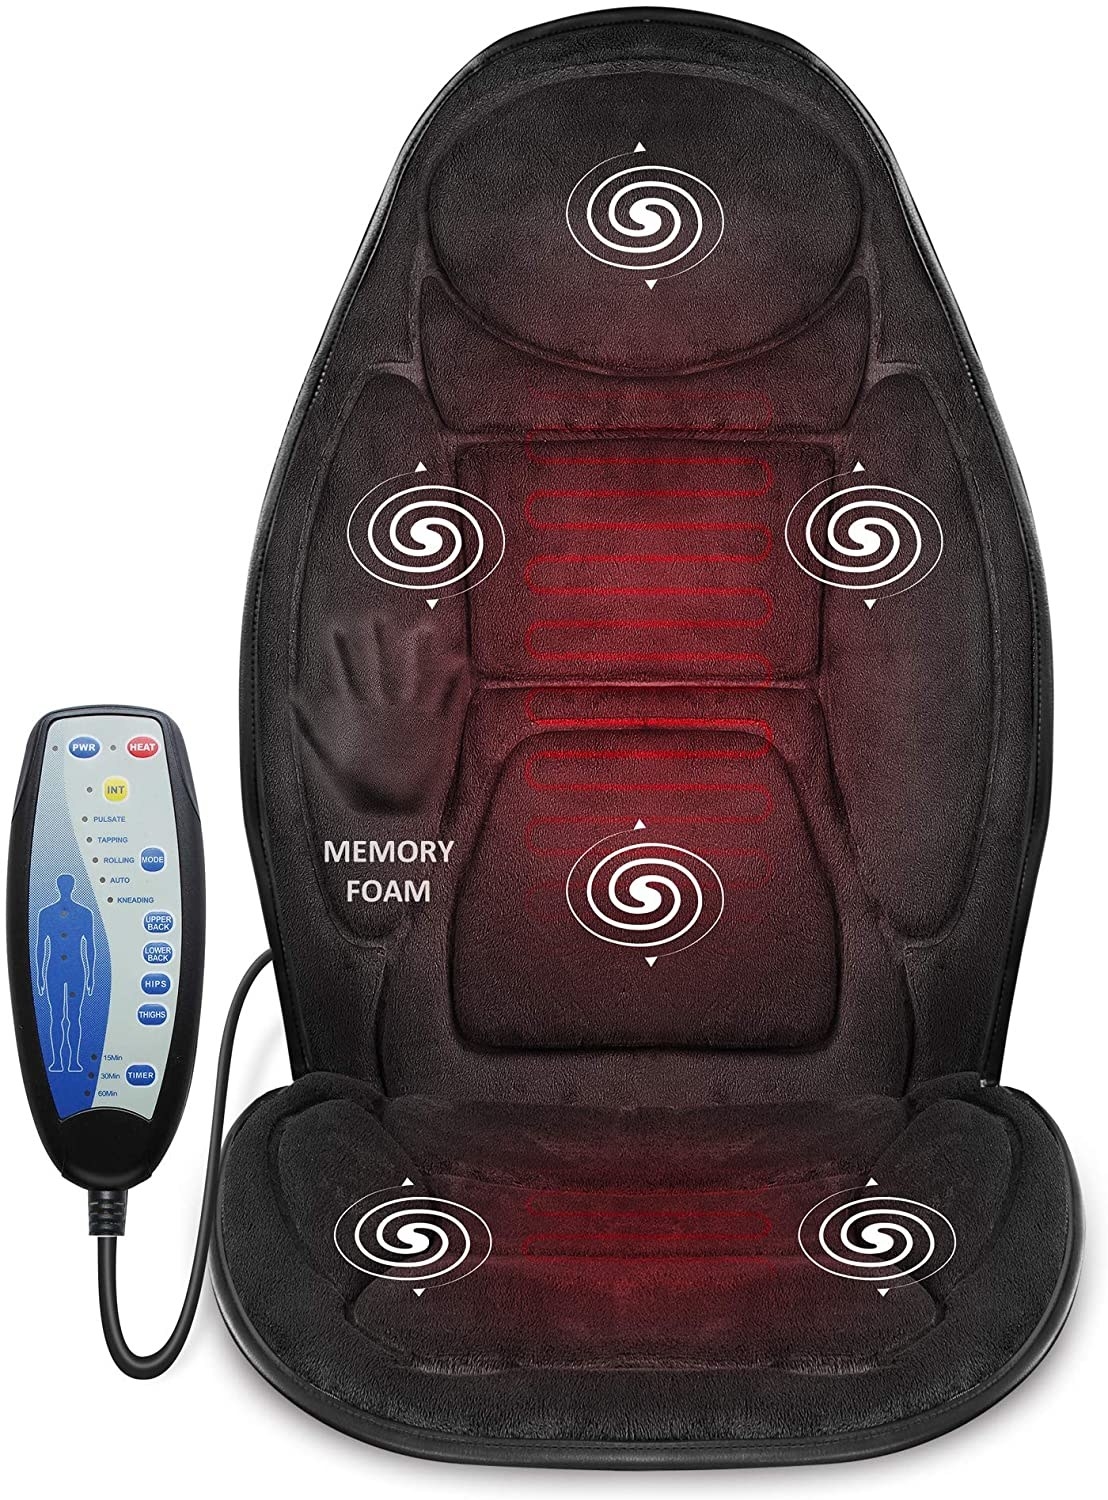 The black heated memory foam cushion with controller